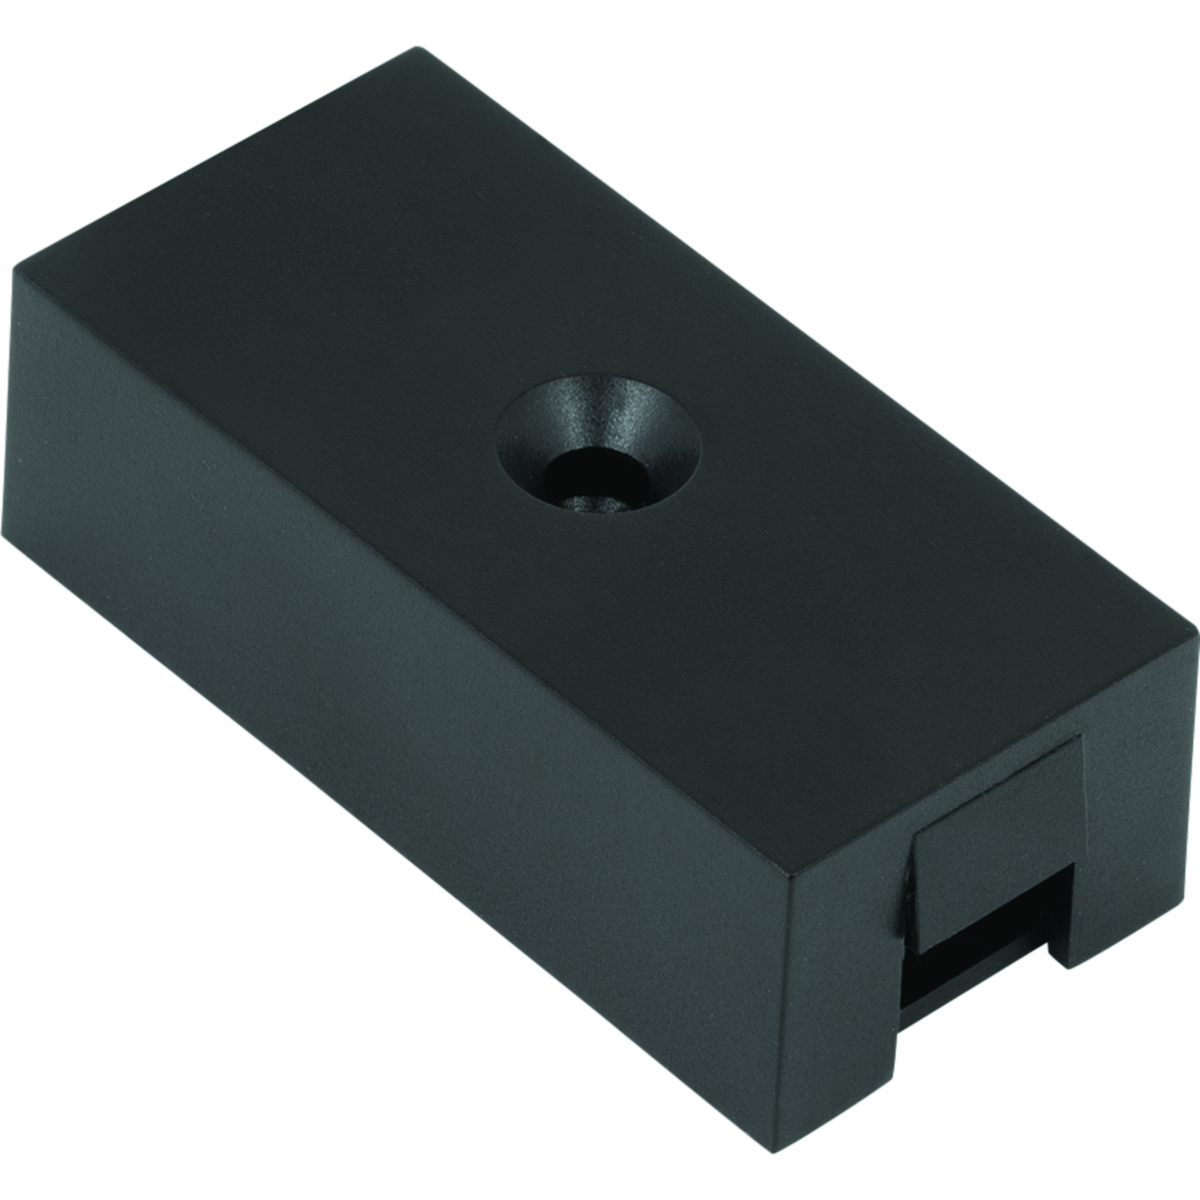 Splice box for Hide-a-Lite 4 tape system. Splicer with connection between Romex wire and low voltage cable or between two sections of low voltage cable. Mounting screws included.